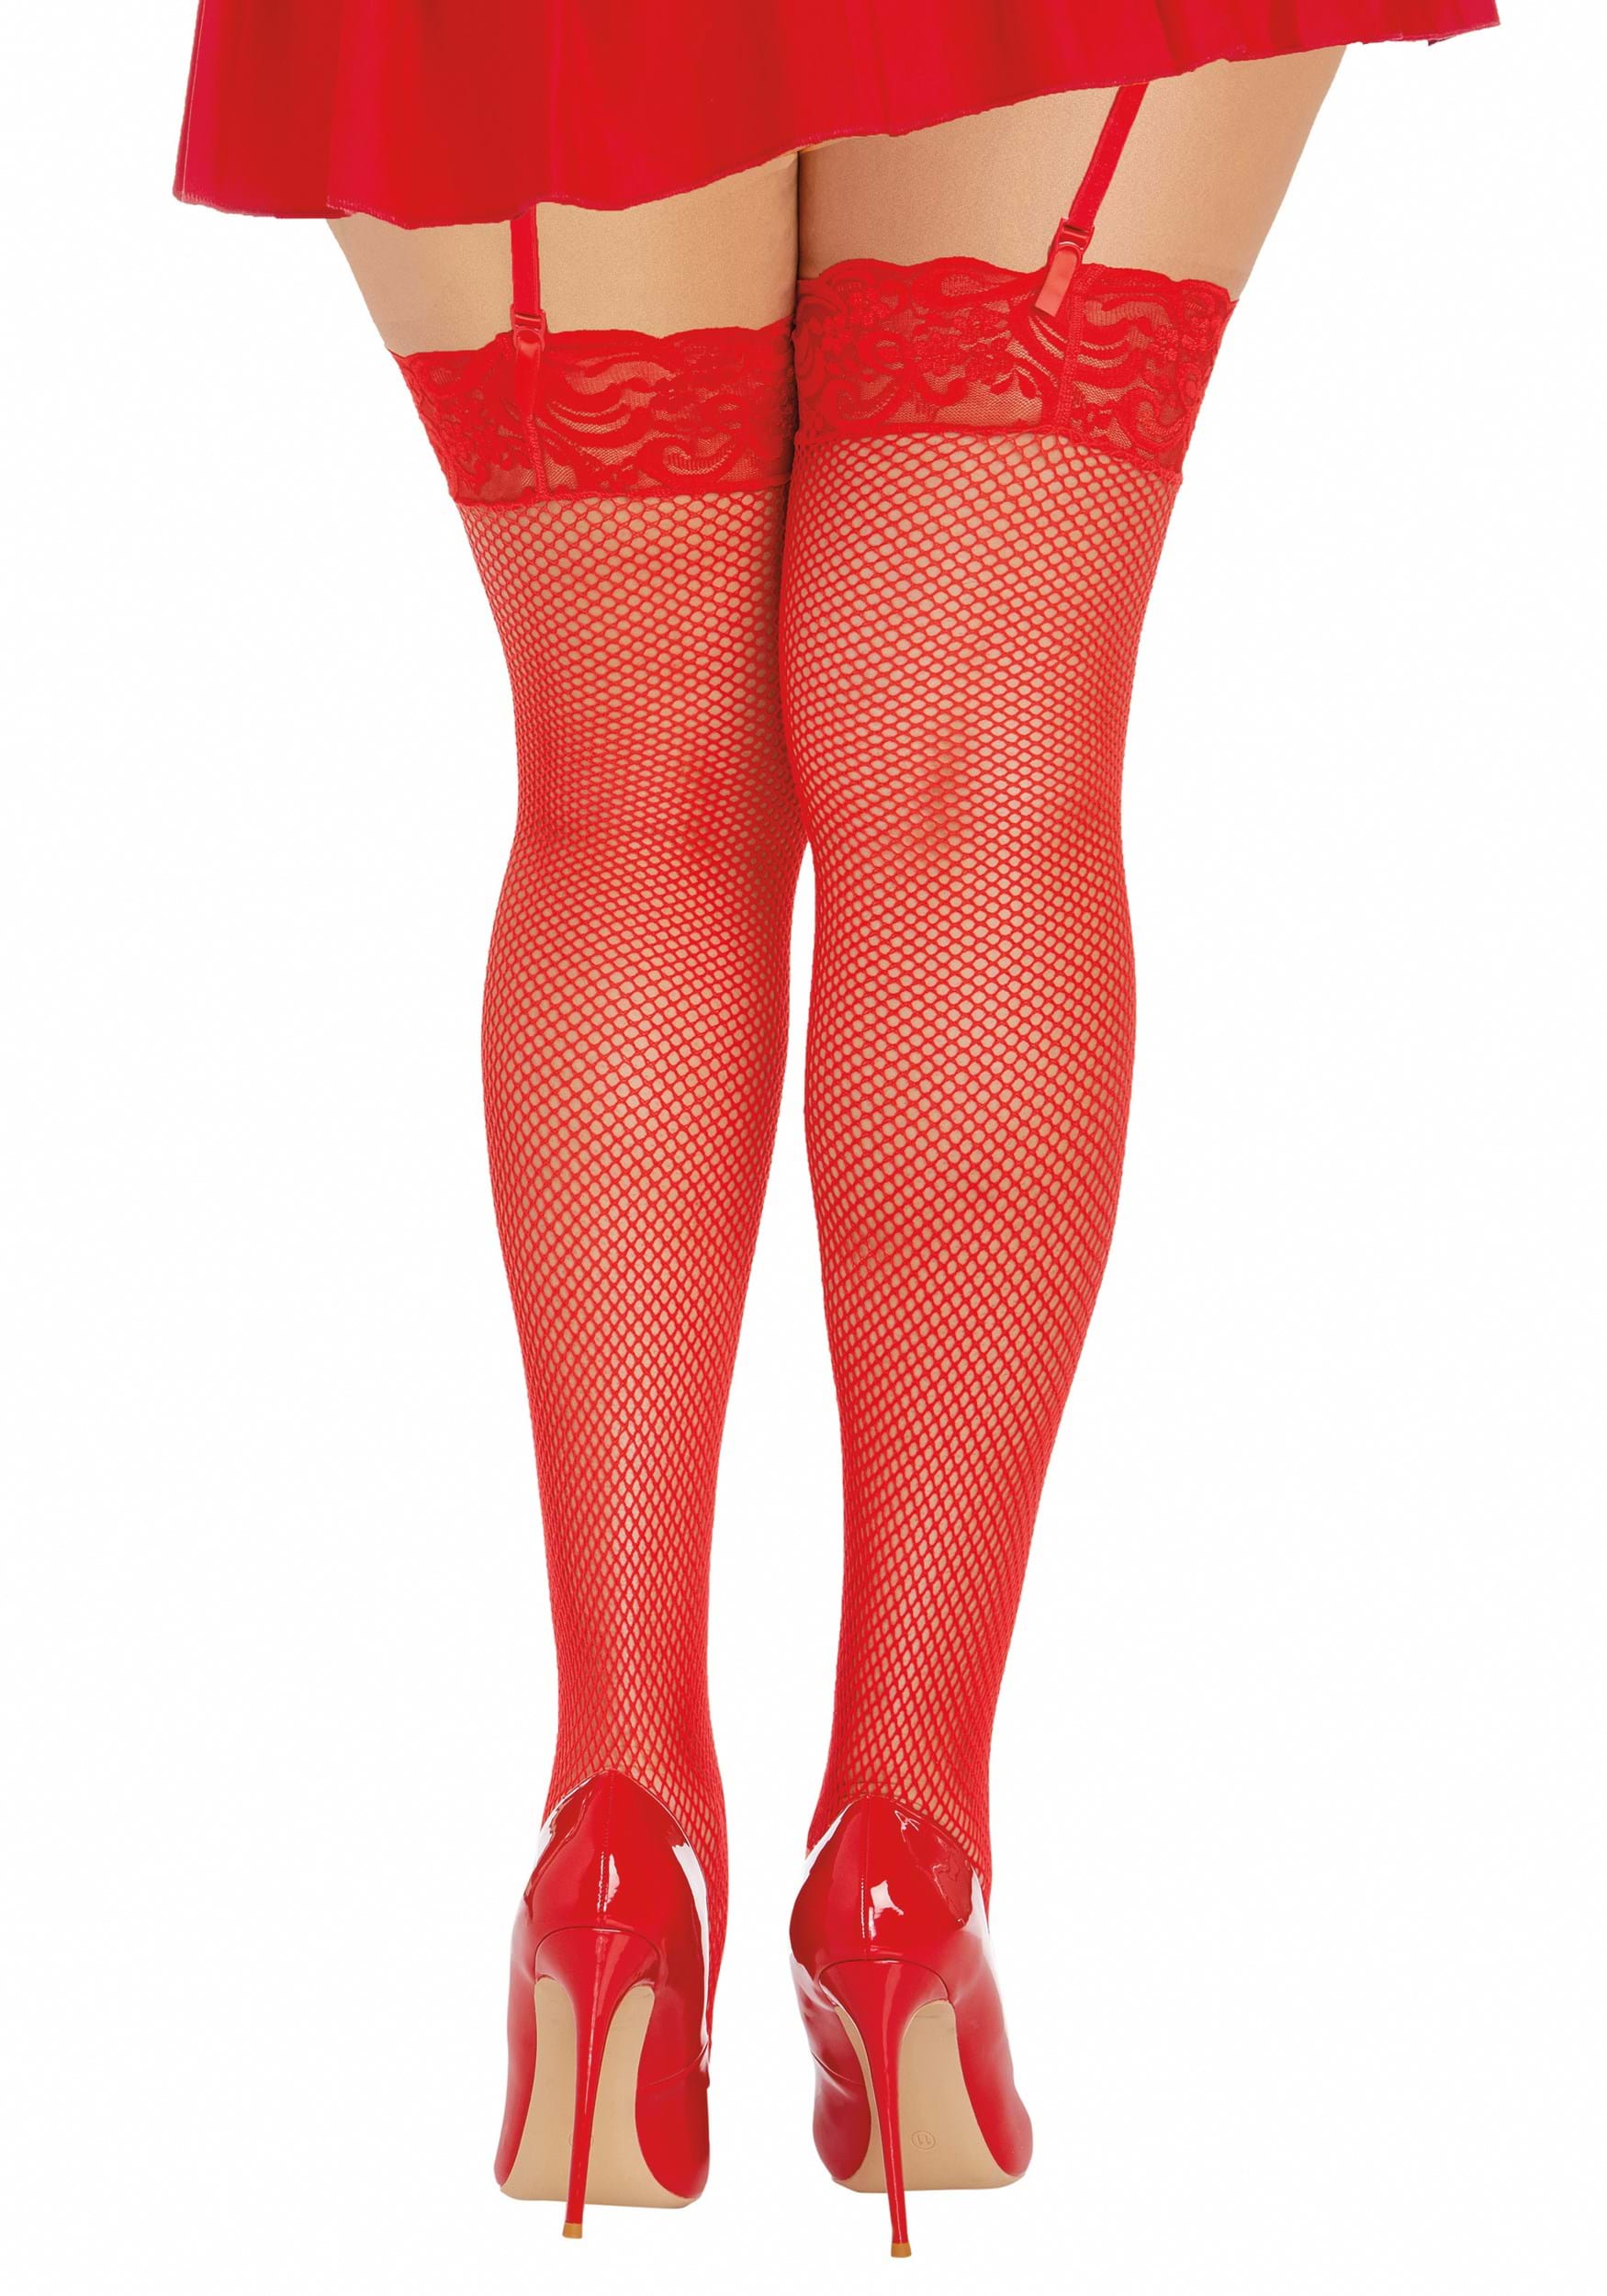 https://images.halloweencostumes.com/products/91564/2-1-269104/womens-plus-size-red-thigh-high-fishnet-w-lace-t-alt-1.jpg